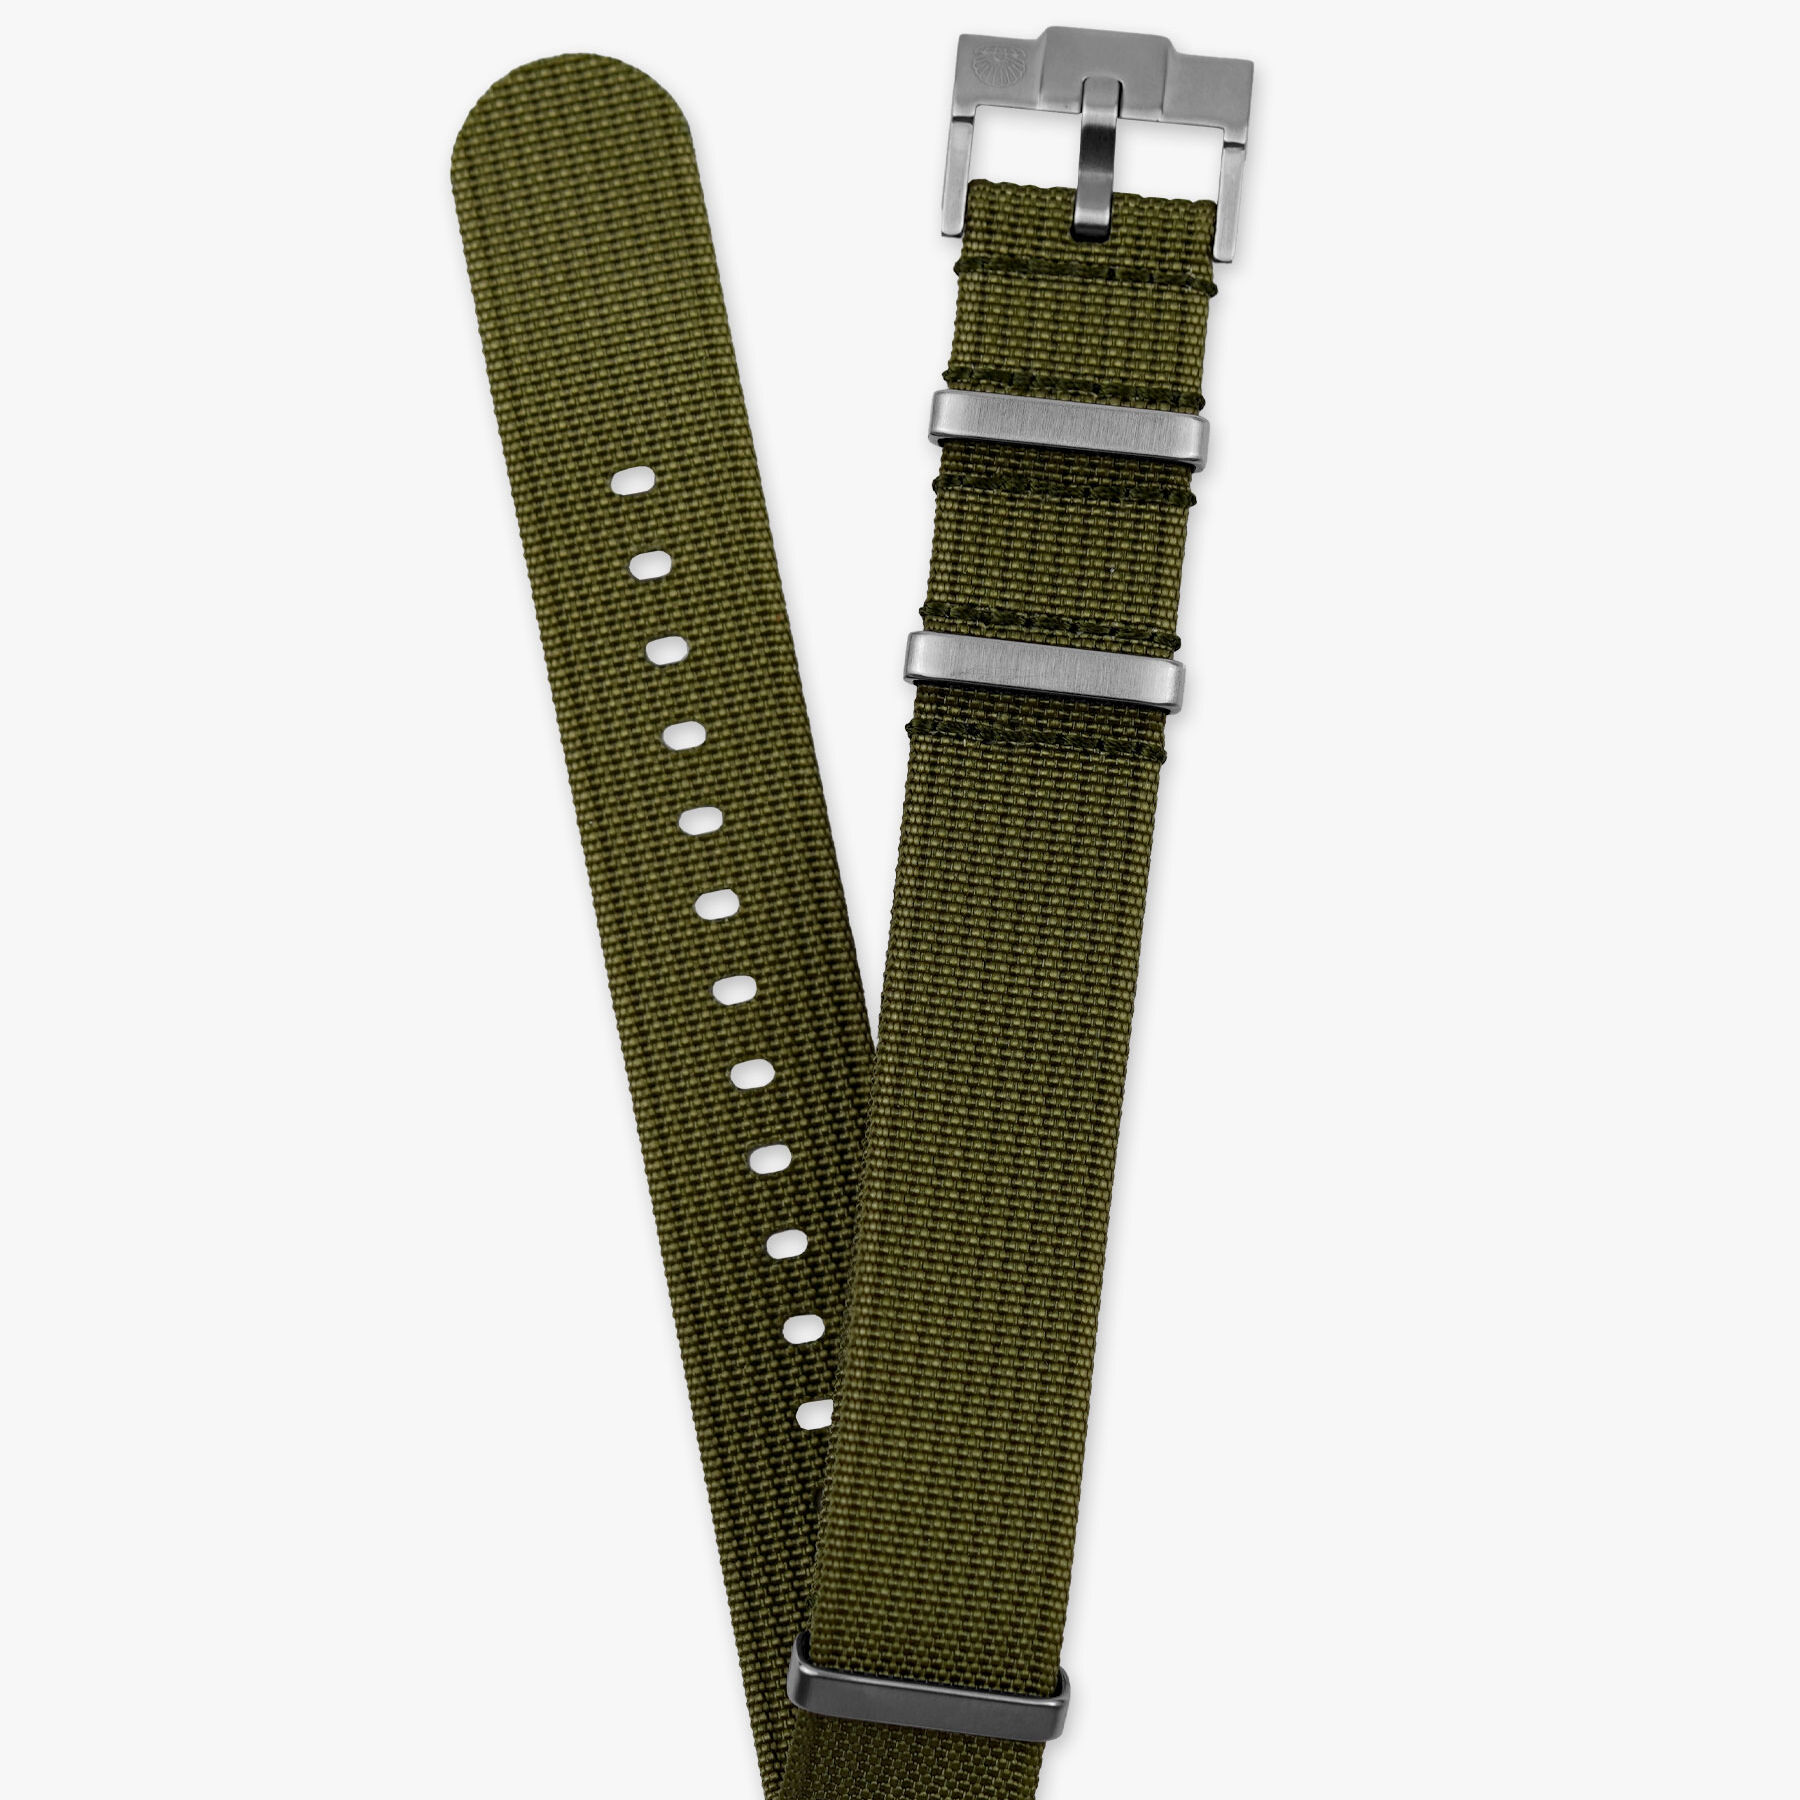 Nato Strap for moonswatch - army green